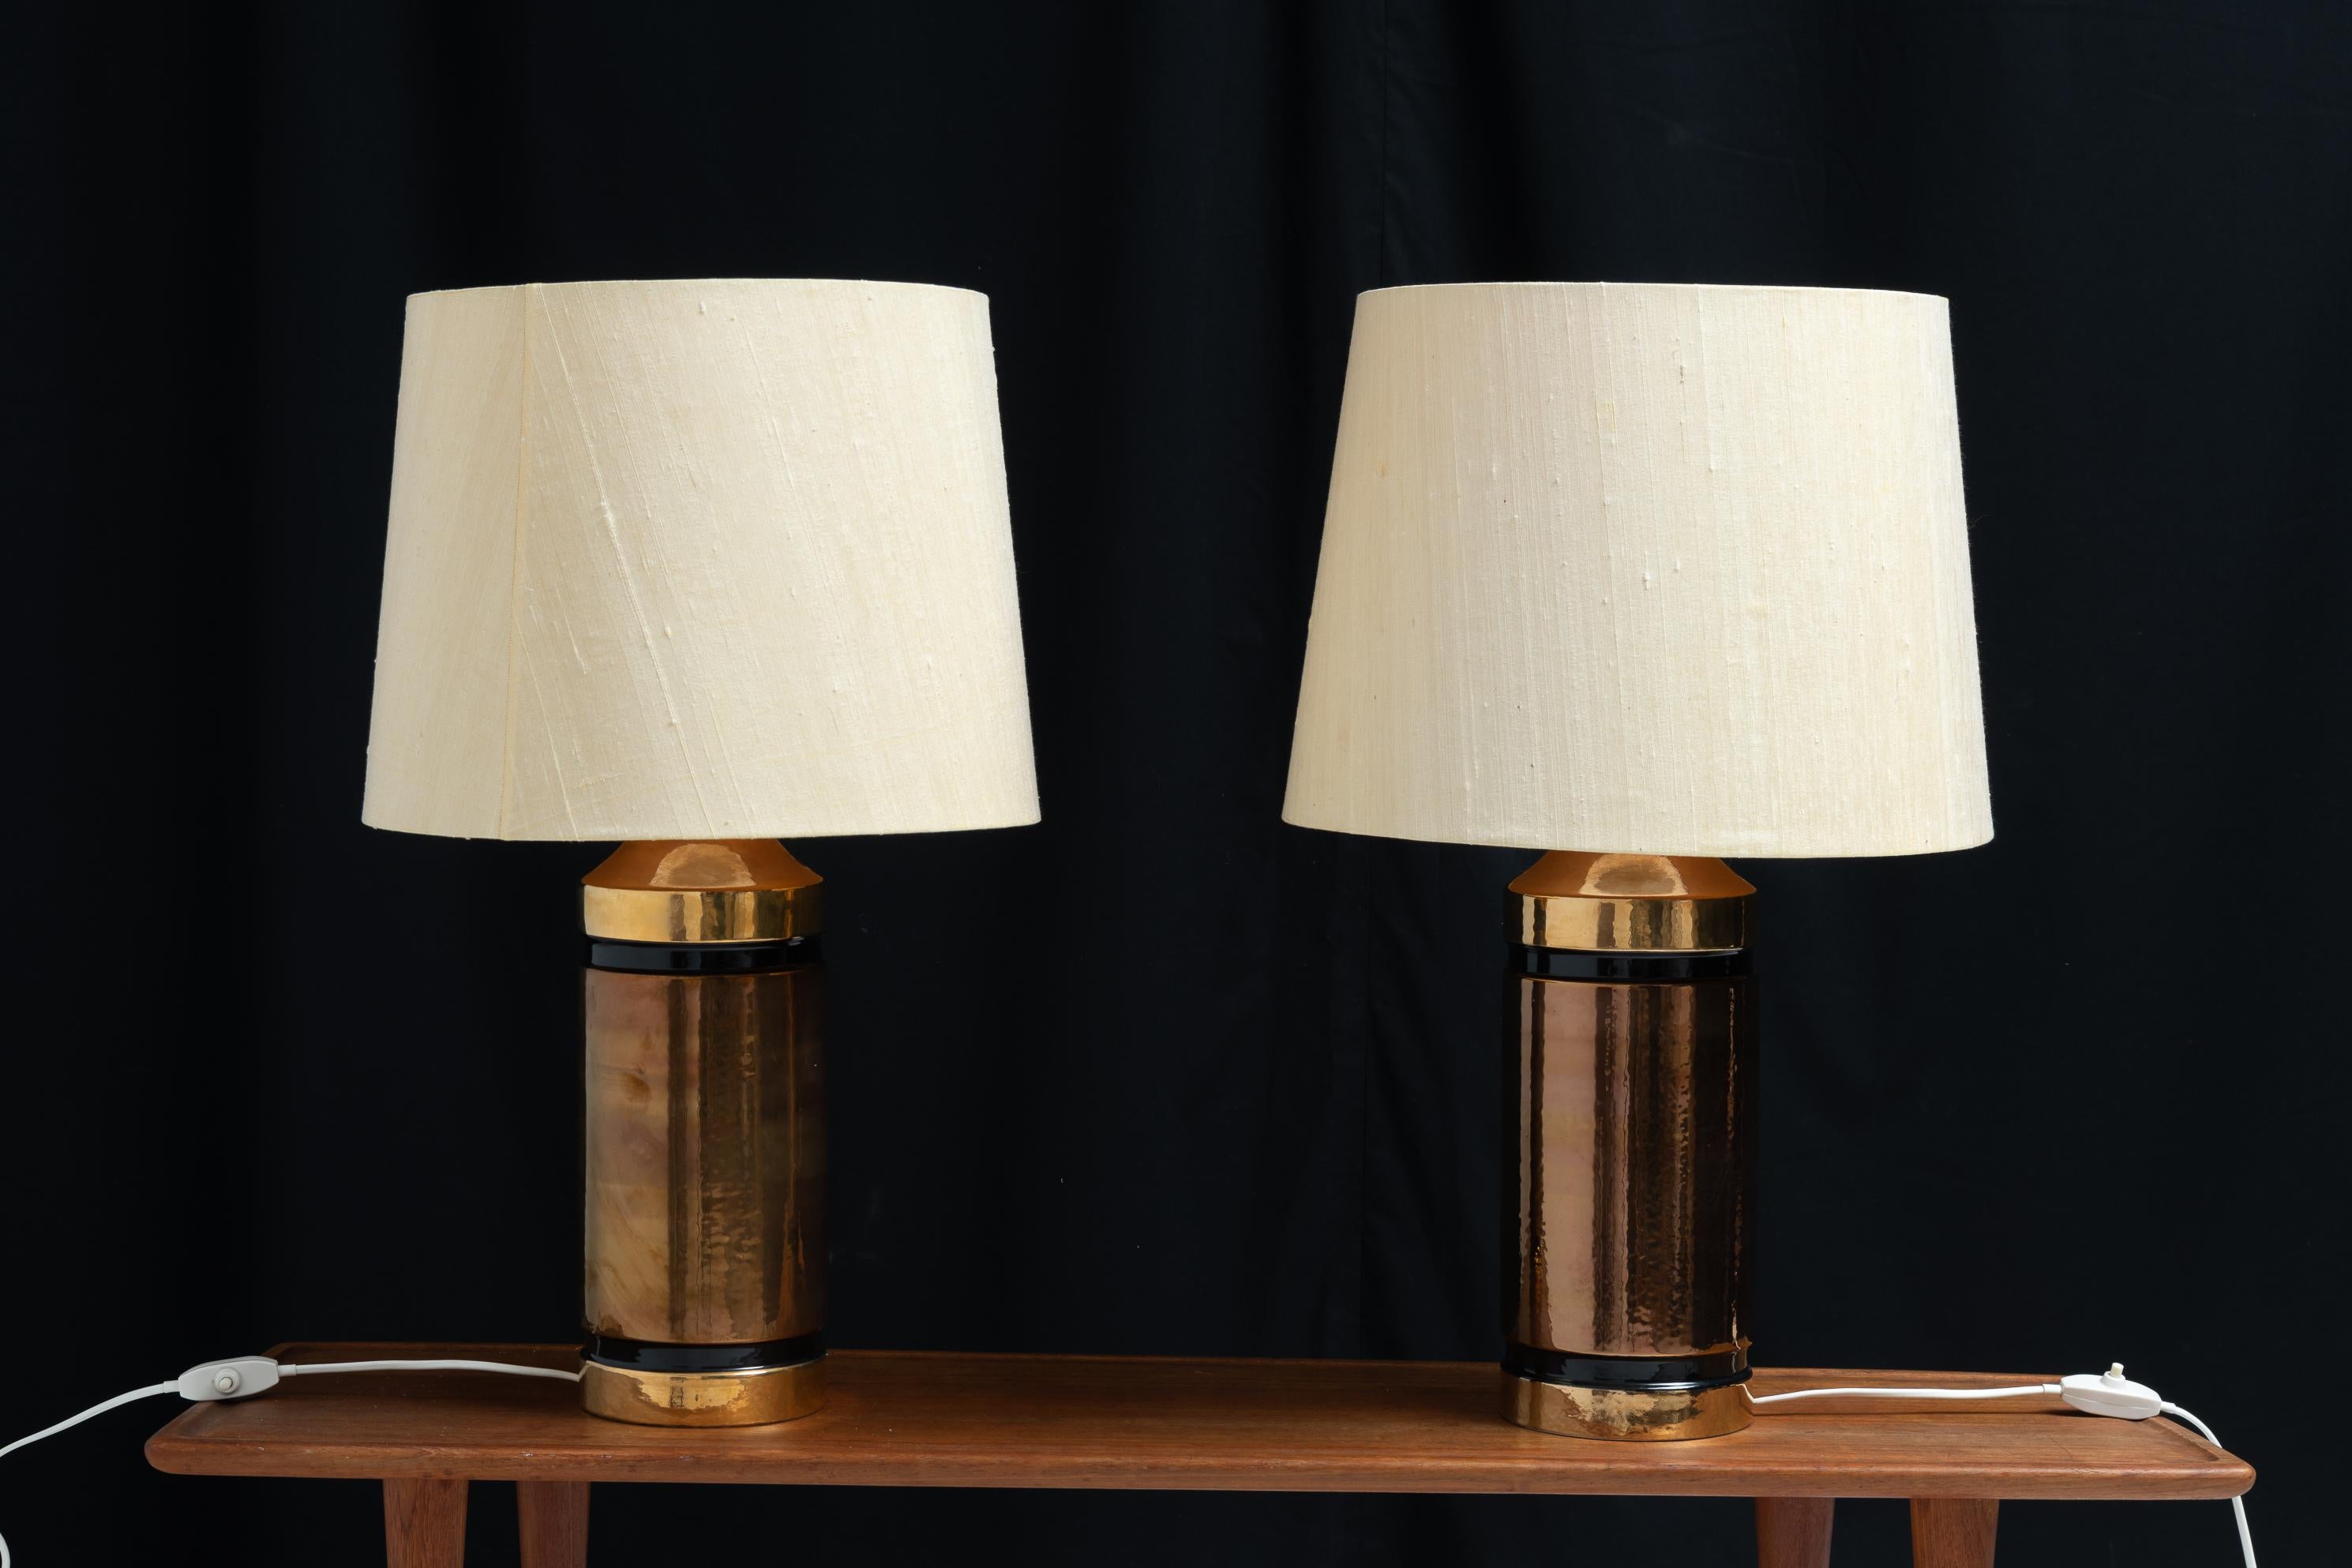 Pair of ceramic table lamps by Bitossi for Bergboms in Sweden. The pair are likely from the 1970s and have a cylindrical base and warm colours. The shades are the original shades to the lamps but they are slightly faded from time. The lamps were